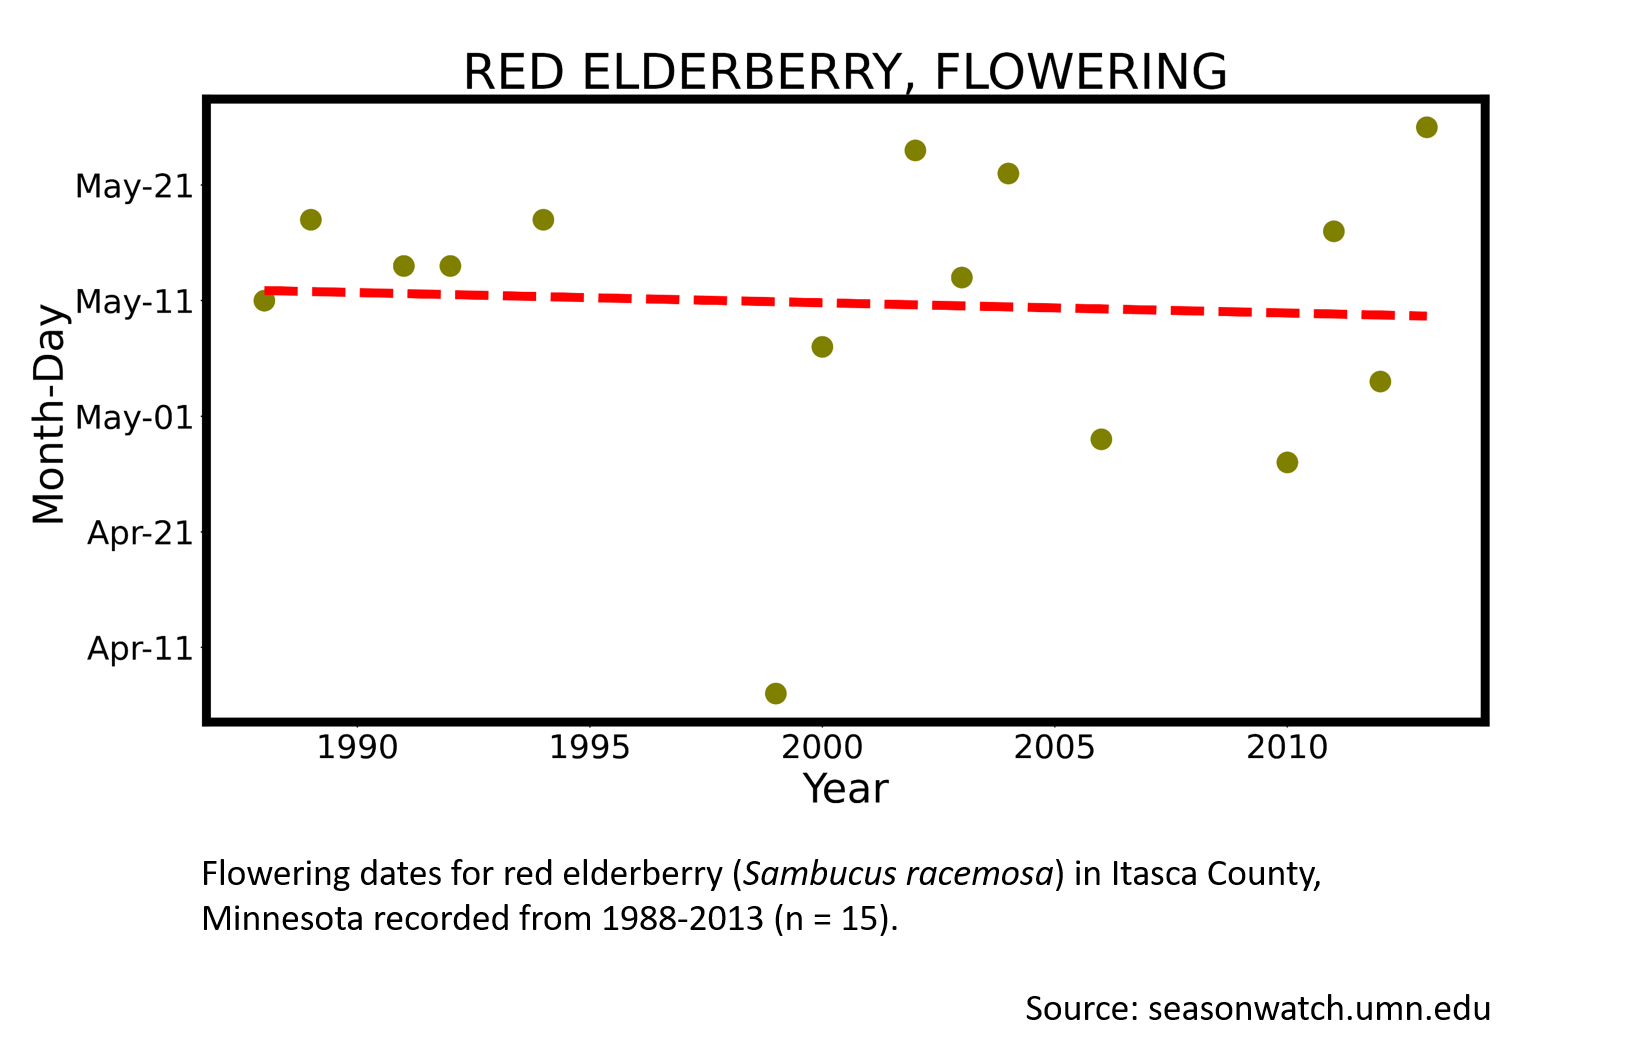 Scatterplot showing red elderberry phenology observations in Itasca County, Minnesota